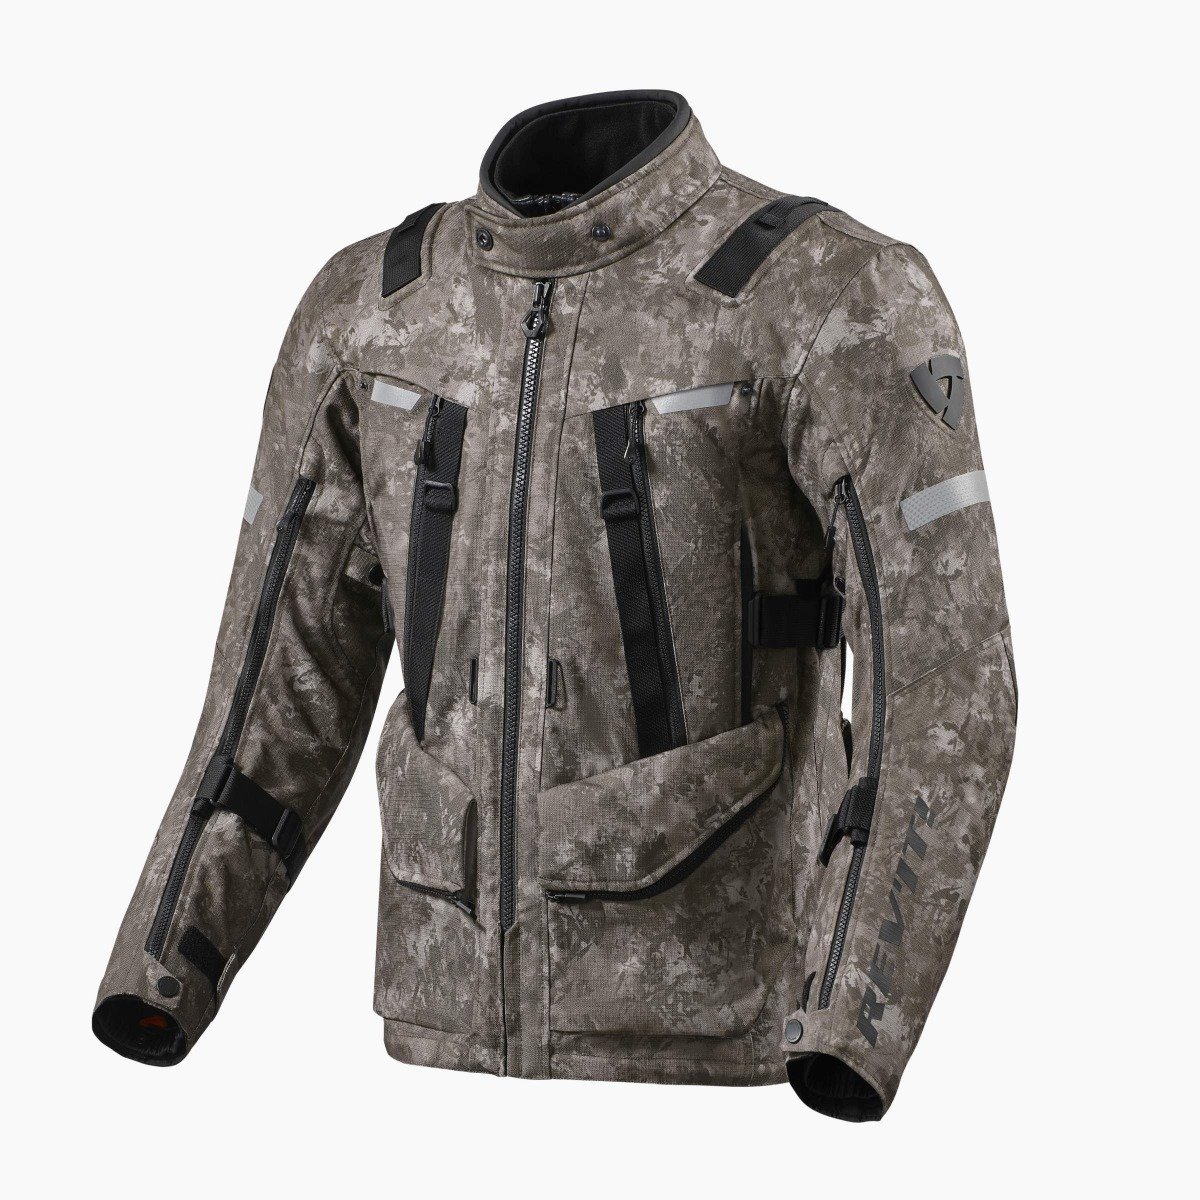 Image of REV'IT! Sand 4 H2O Jacket Camo Brown Size L ID 8700001311397